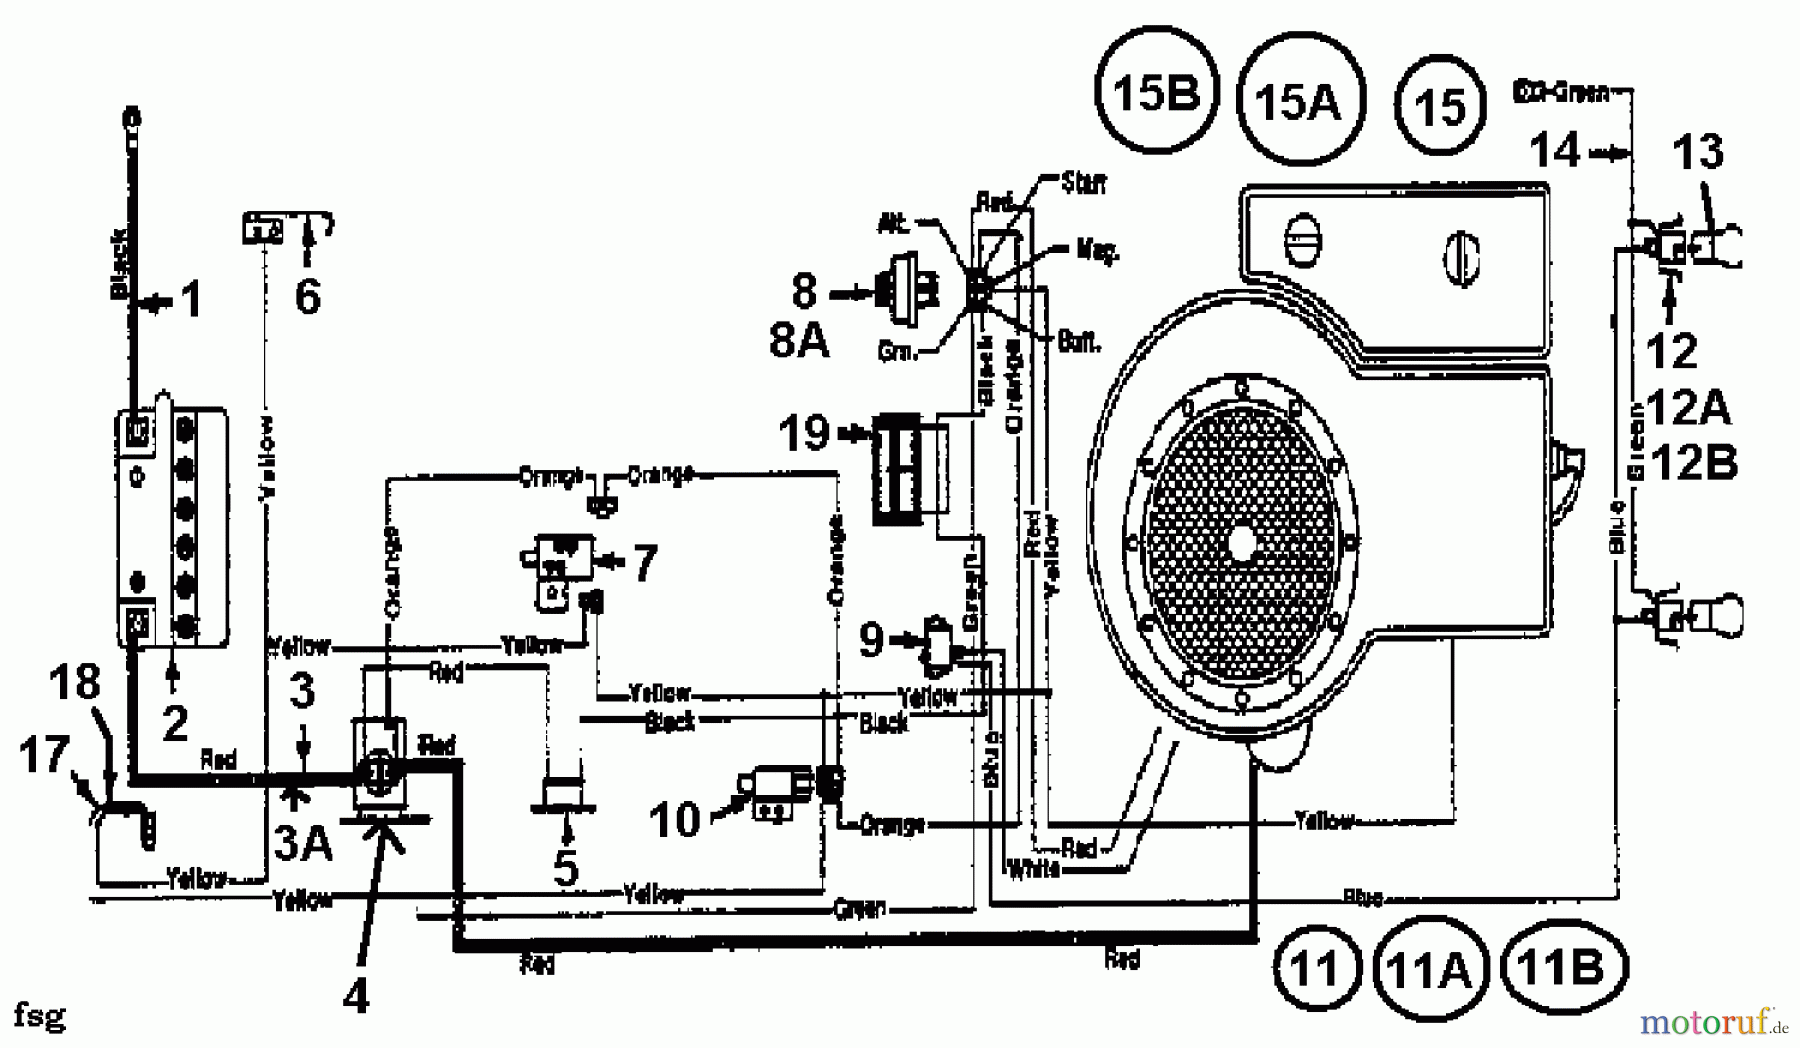  Florica Lawn tractors 12/91 133I470E638  (1993) Wiring diagram single cylinder